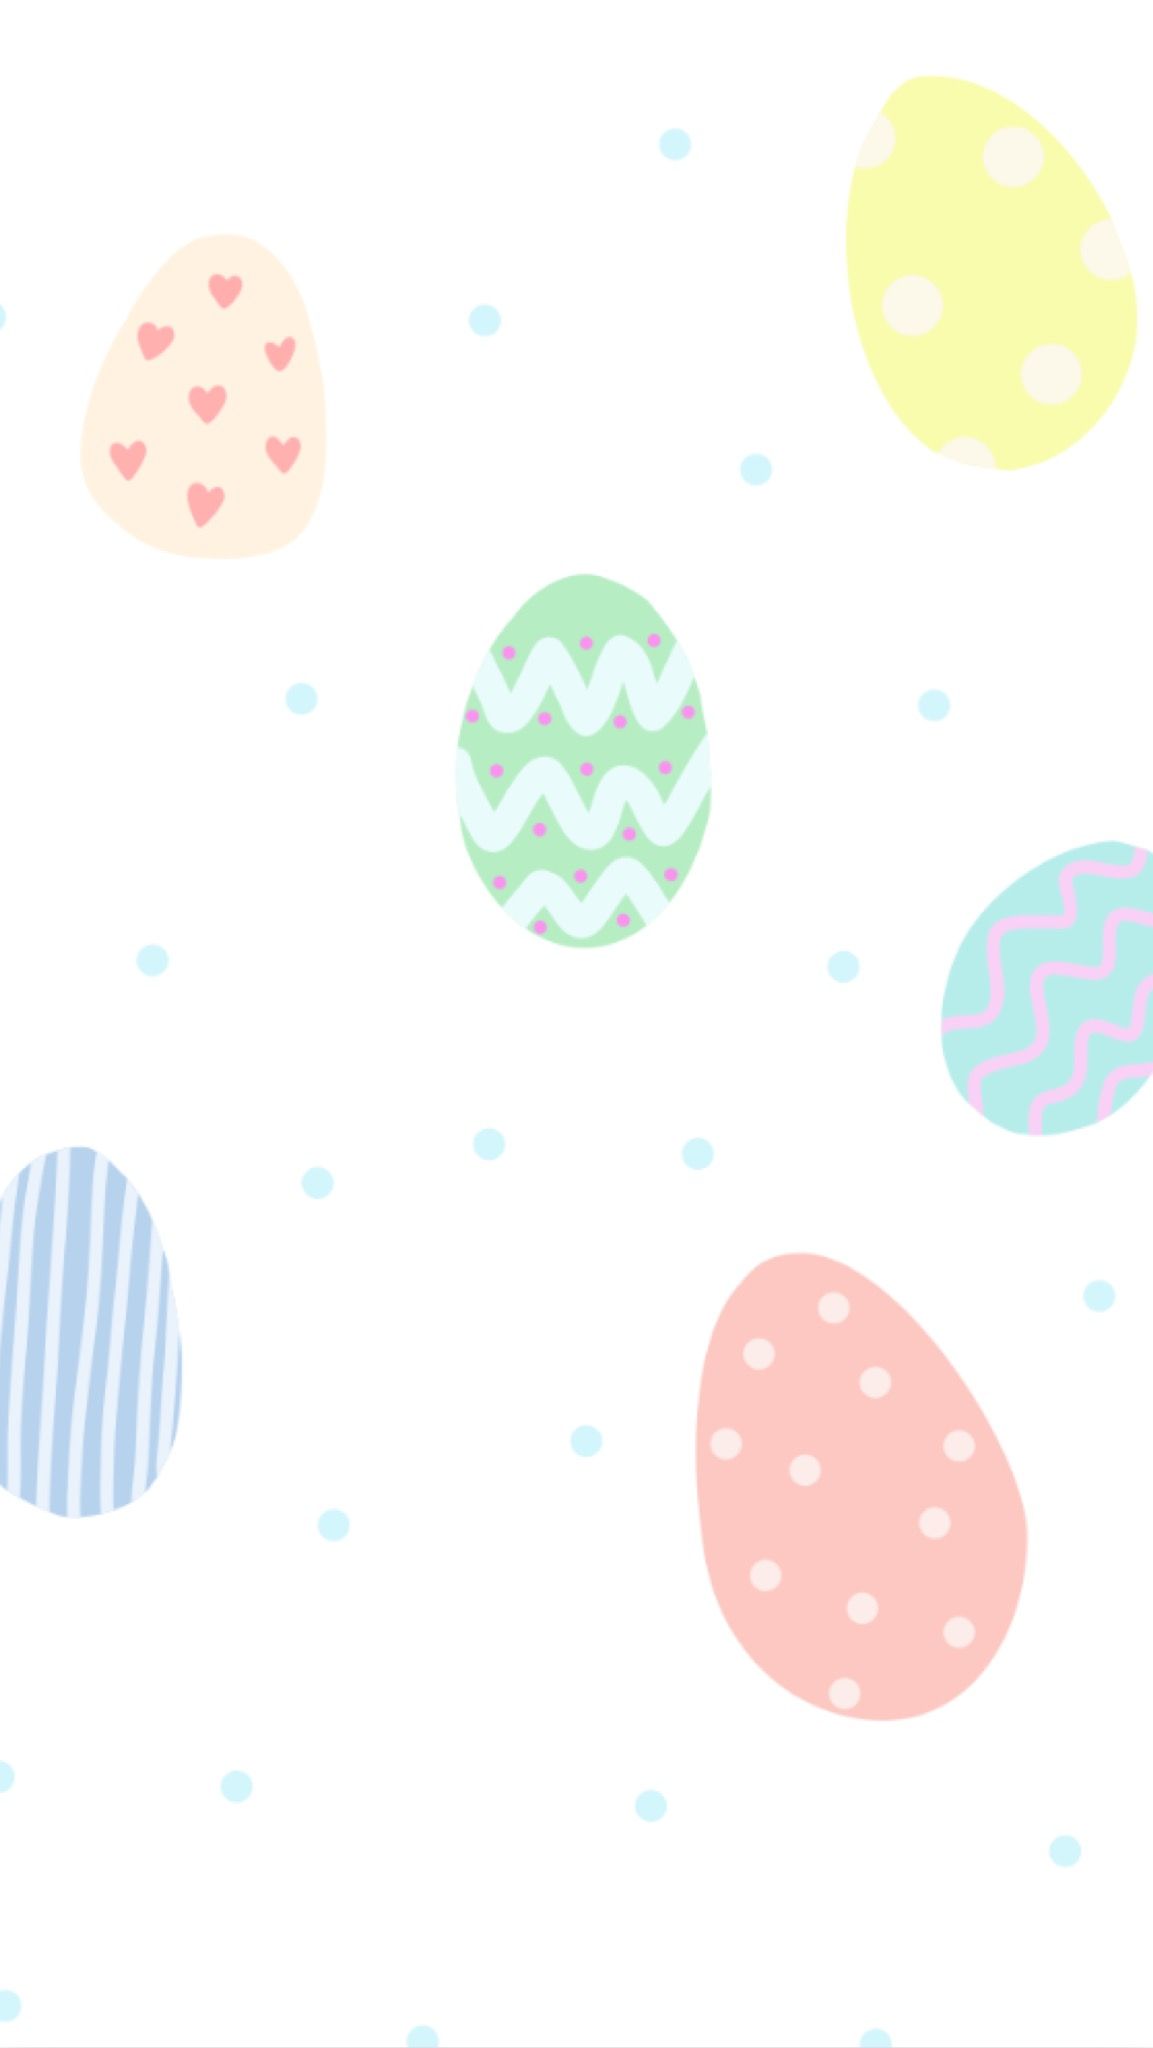 Free Phone Wallpaper} April Easter Eggs and Me. Easter wallpaper, Free phone wallpaper, Easter background